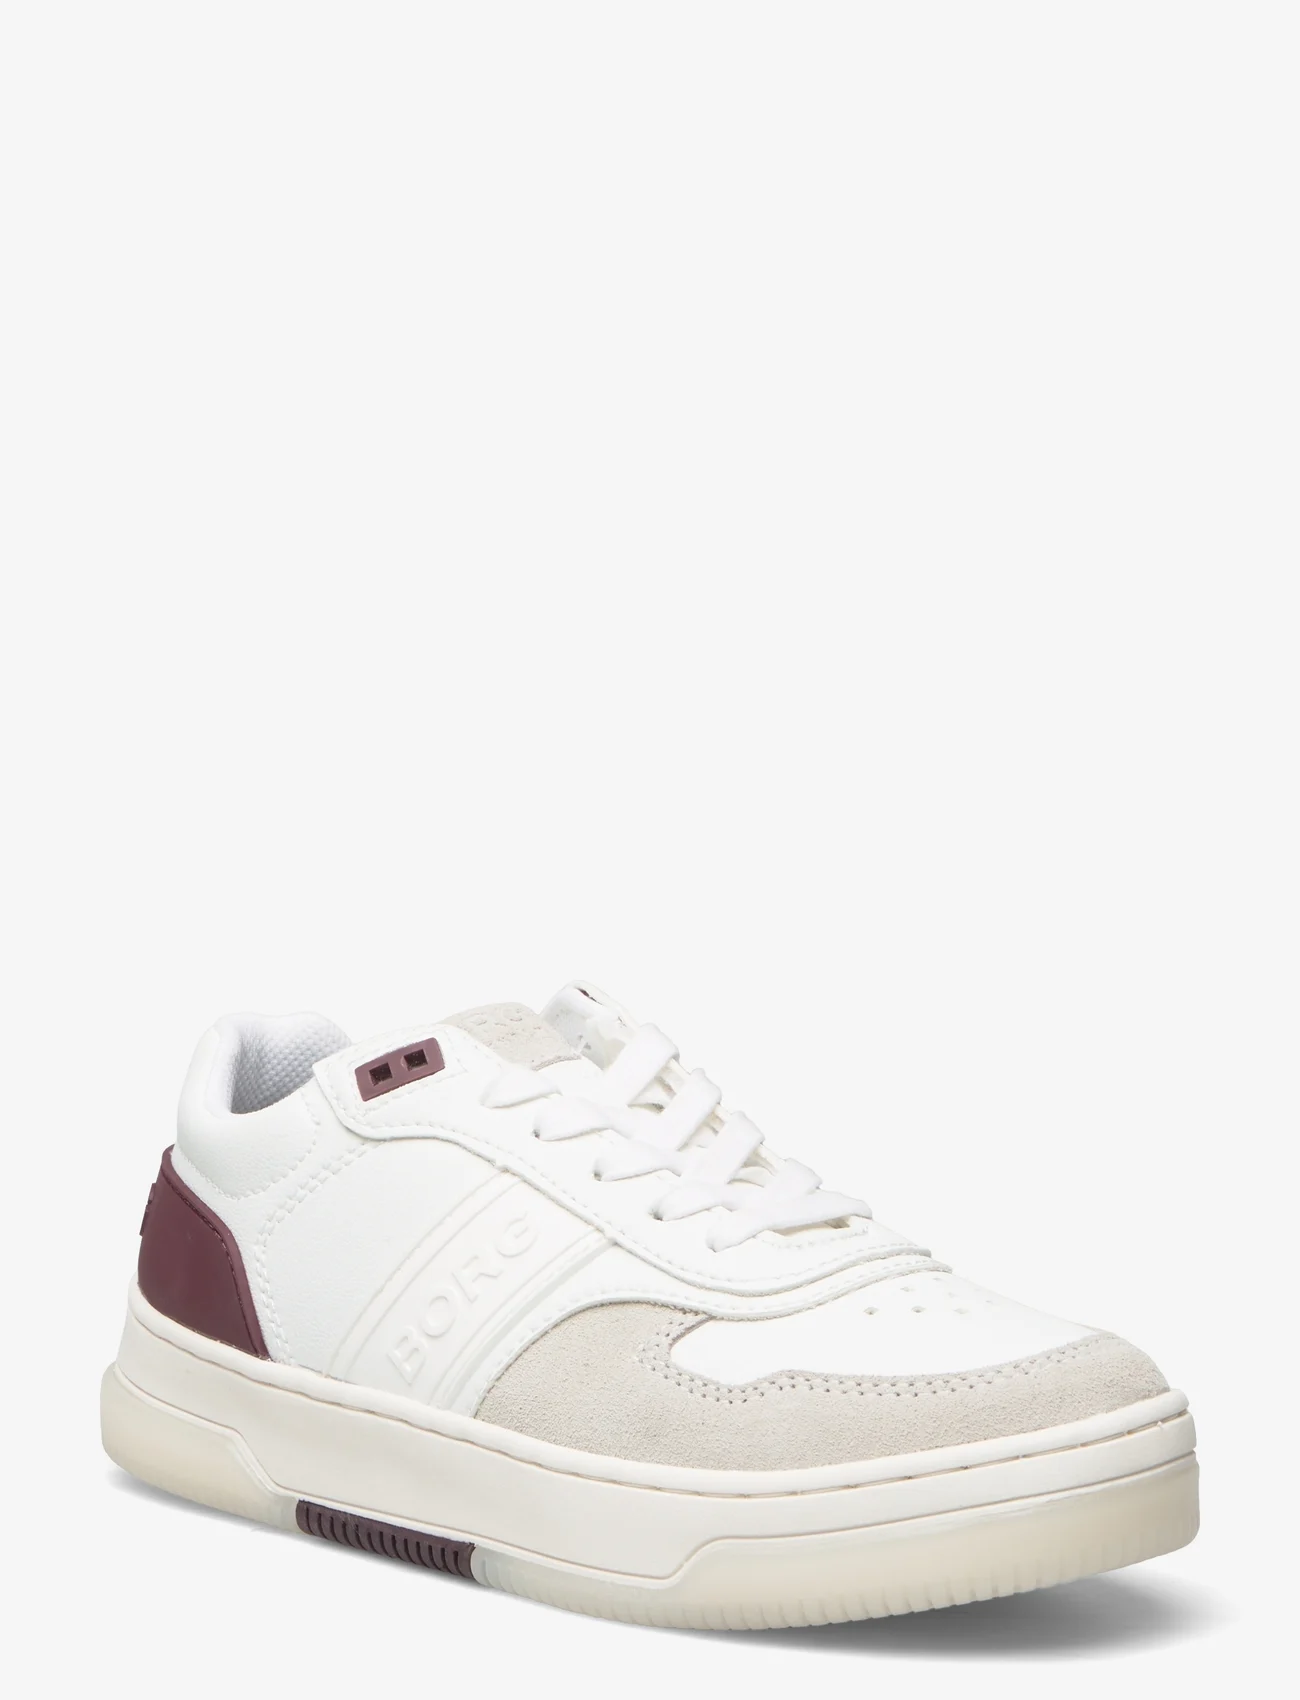 Björn Borg - T2300 CTR W - low top sneakers - wht-brgy - 0